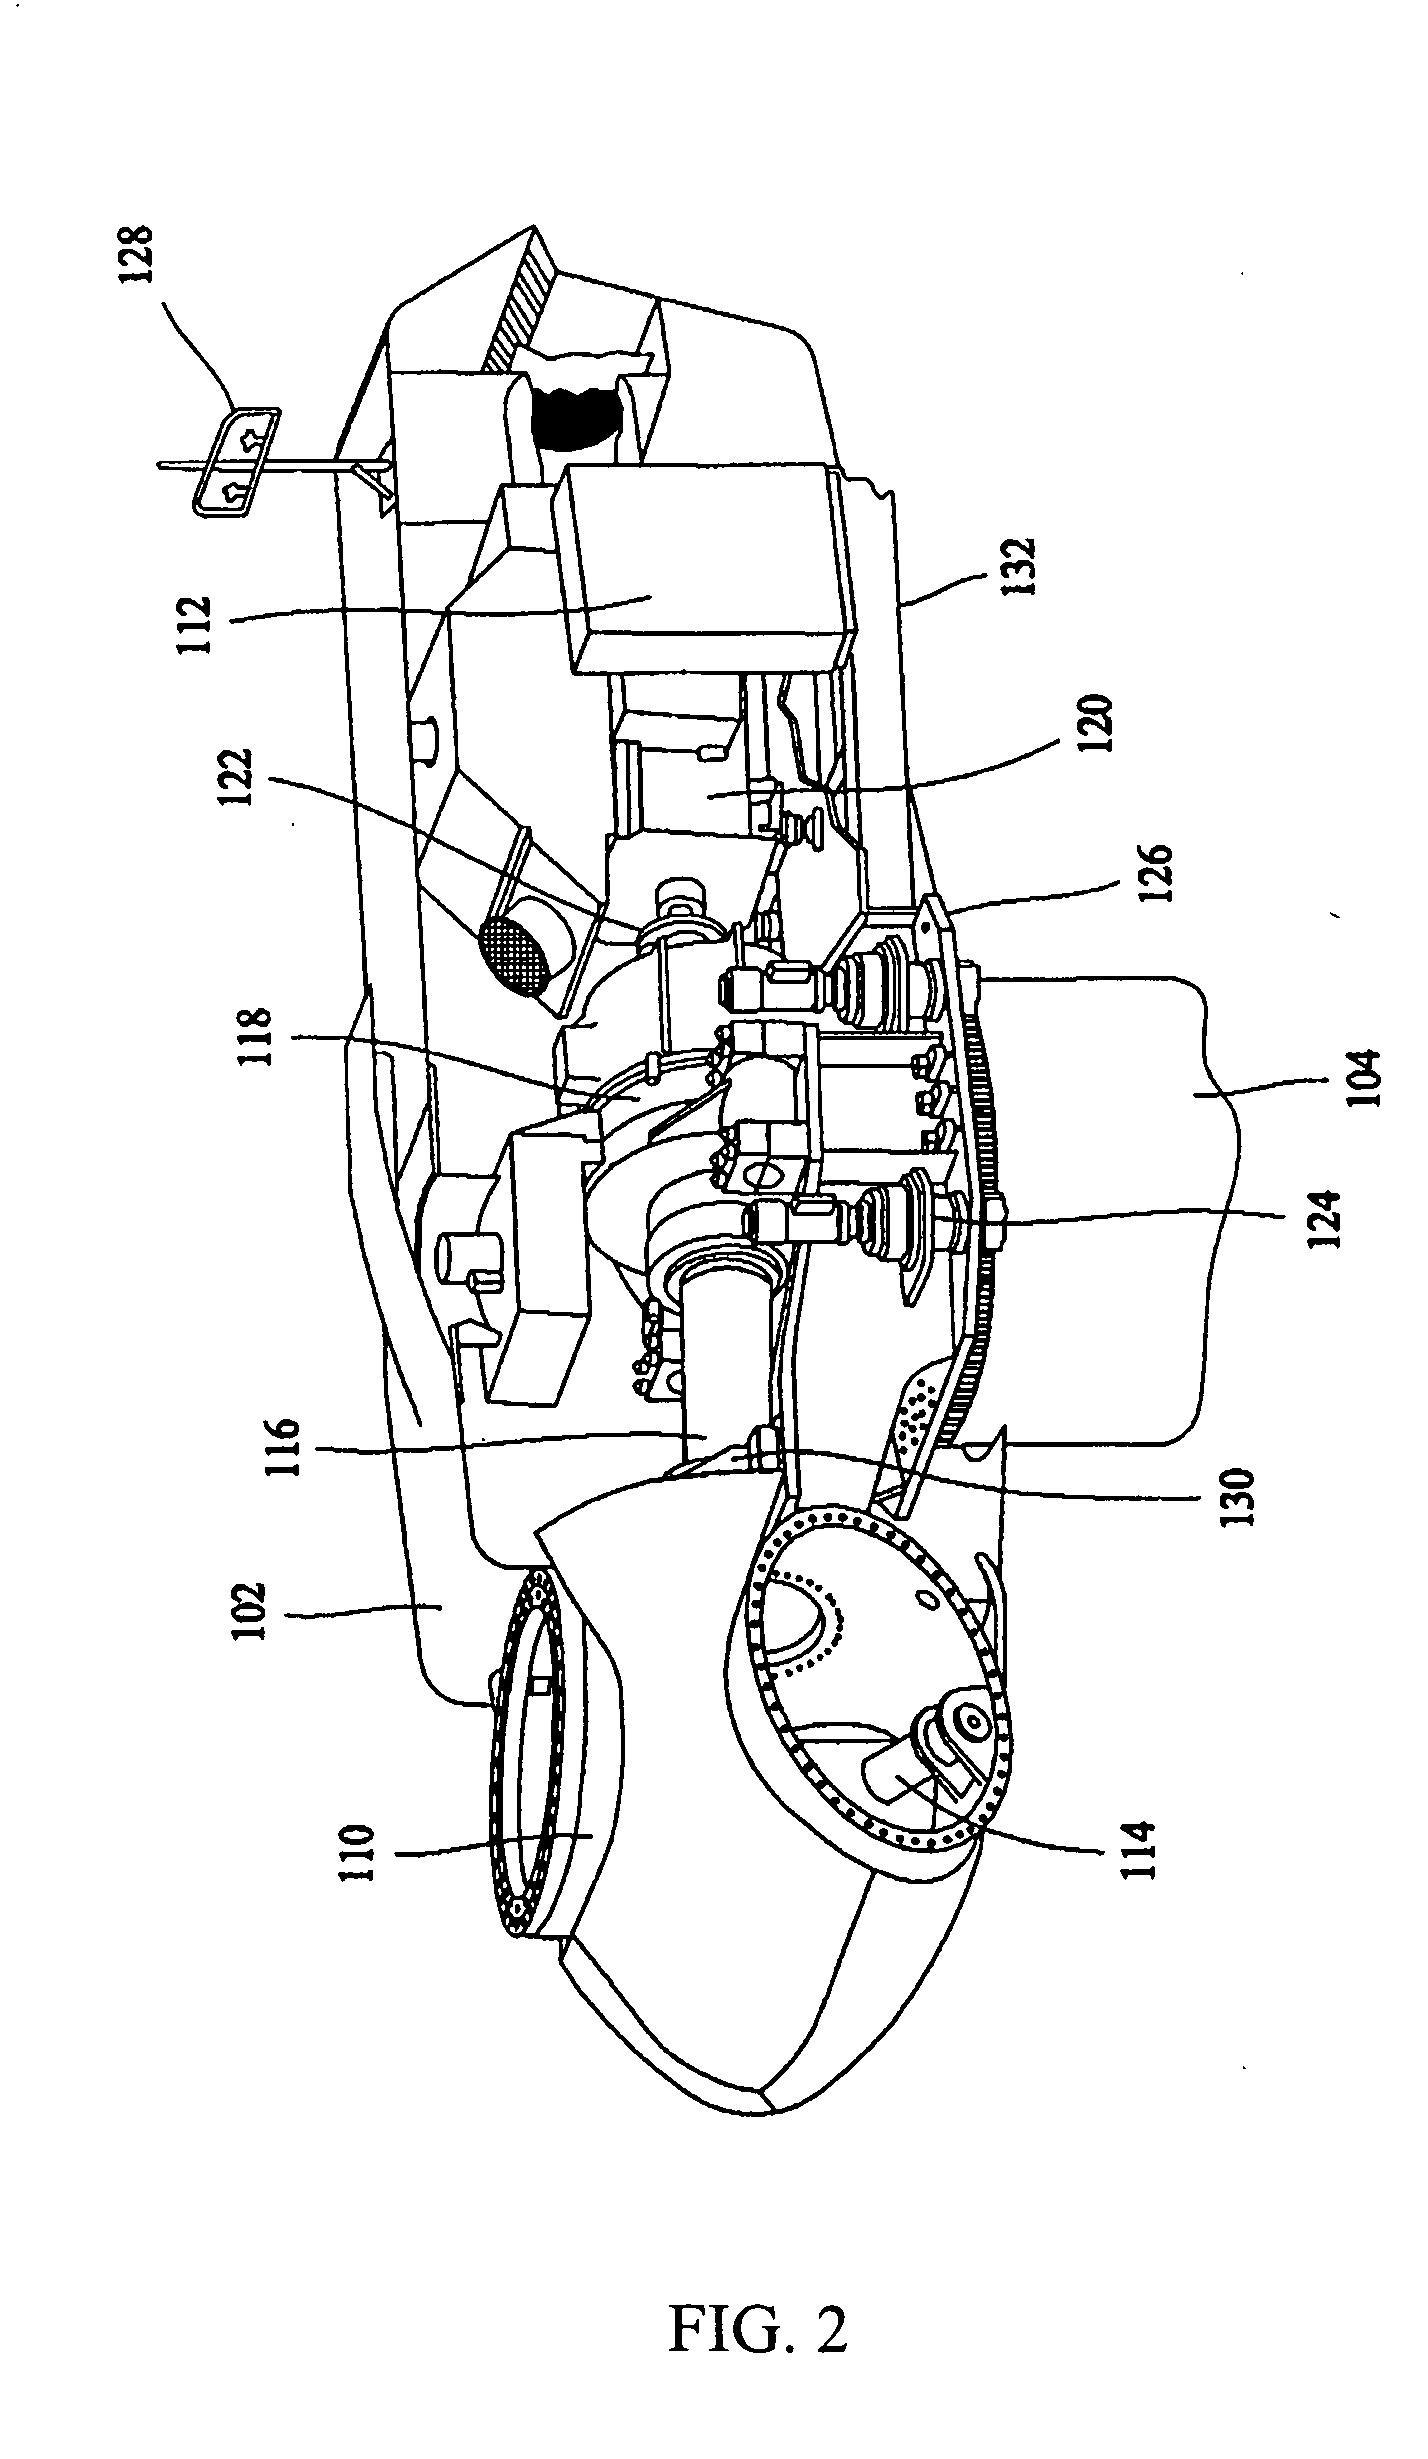 Active flow control for wind turbine blades